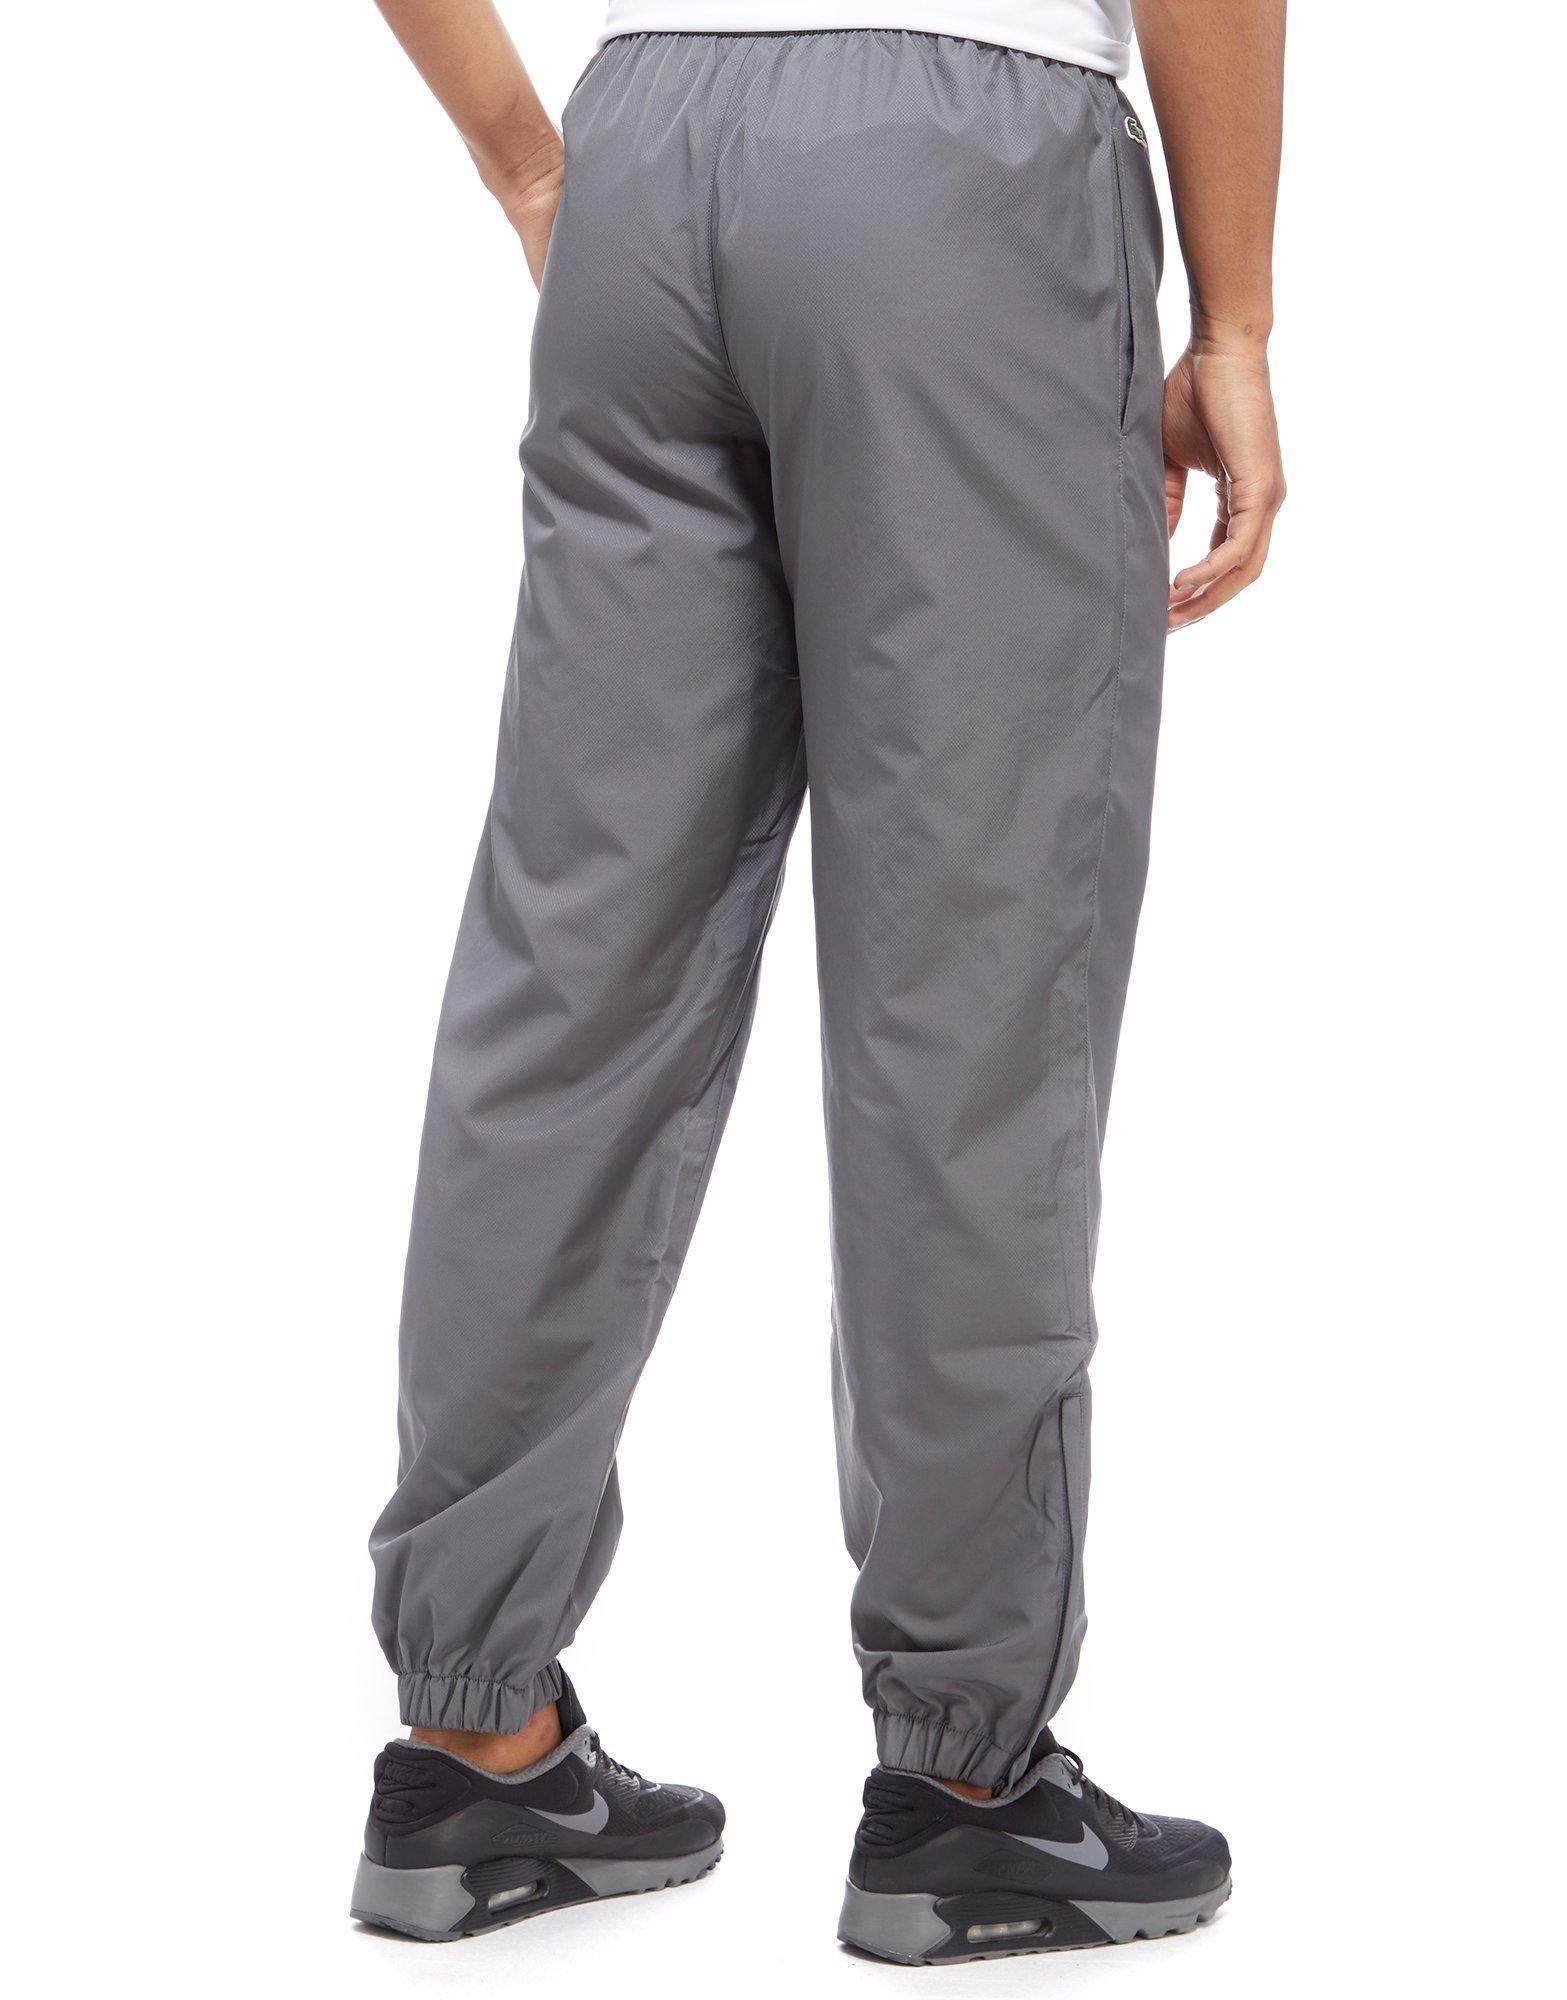 Guppy Track Pants in Charcoal (Gray 